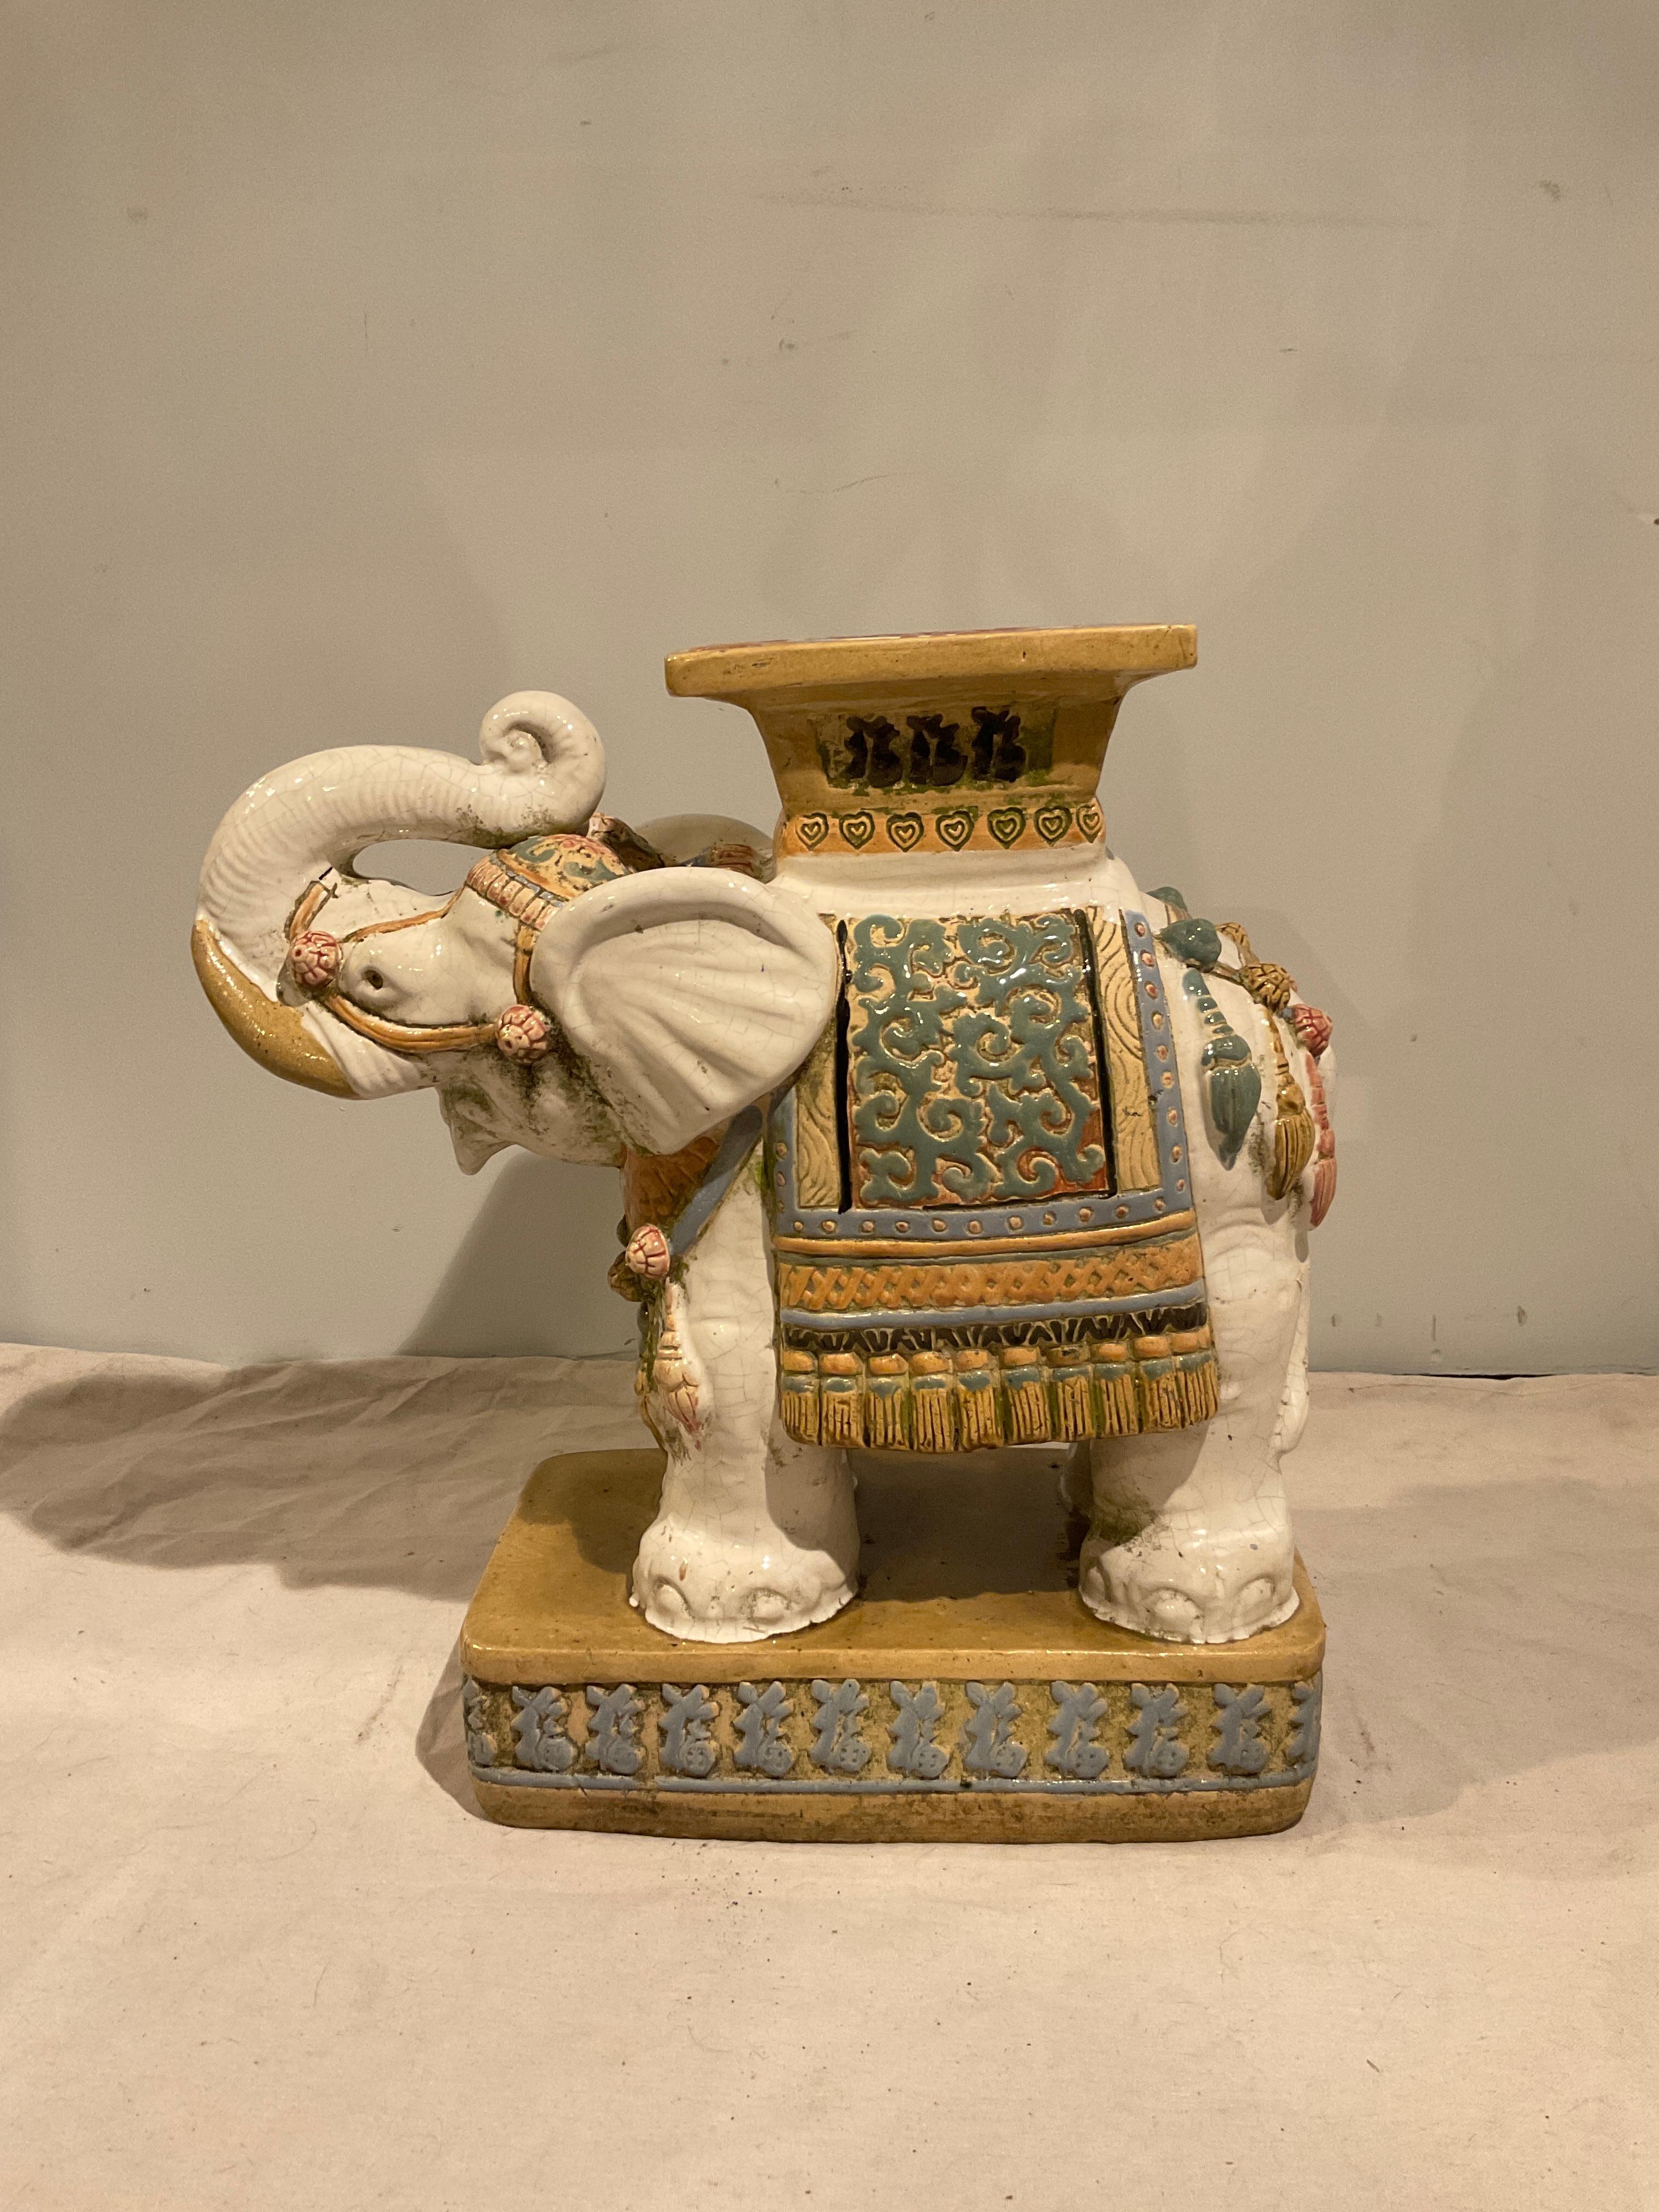 1960s Ceramic Elephant Table In Good Condition For Sale In Tarrytown, NY